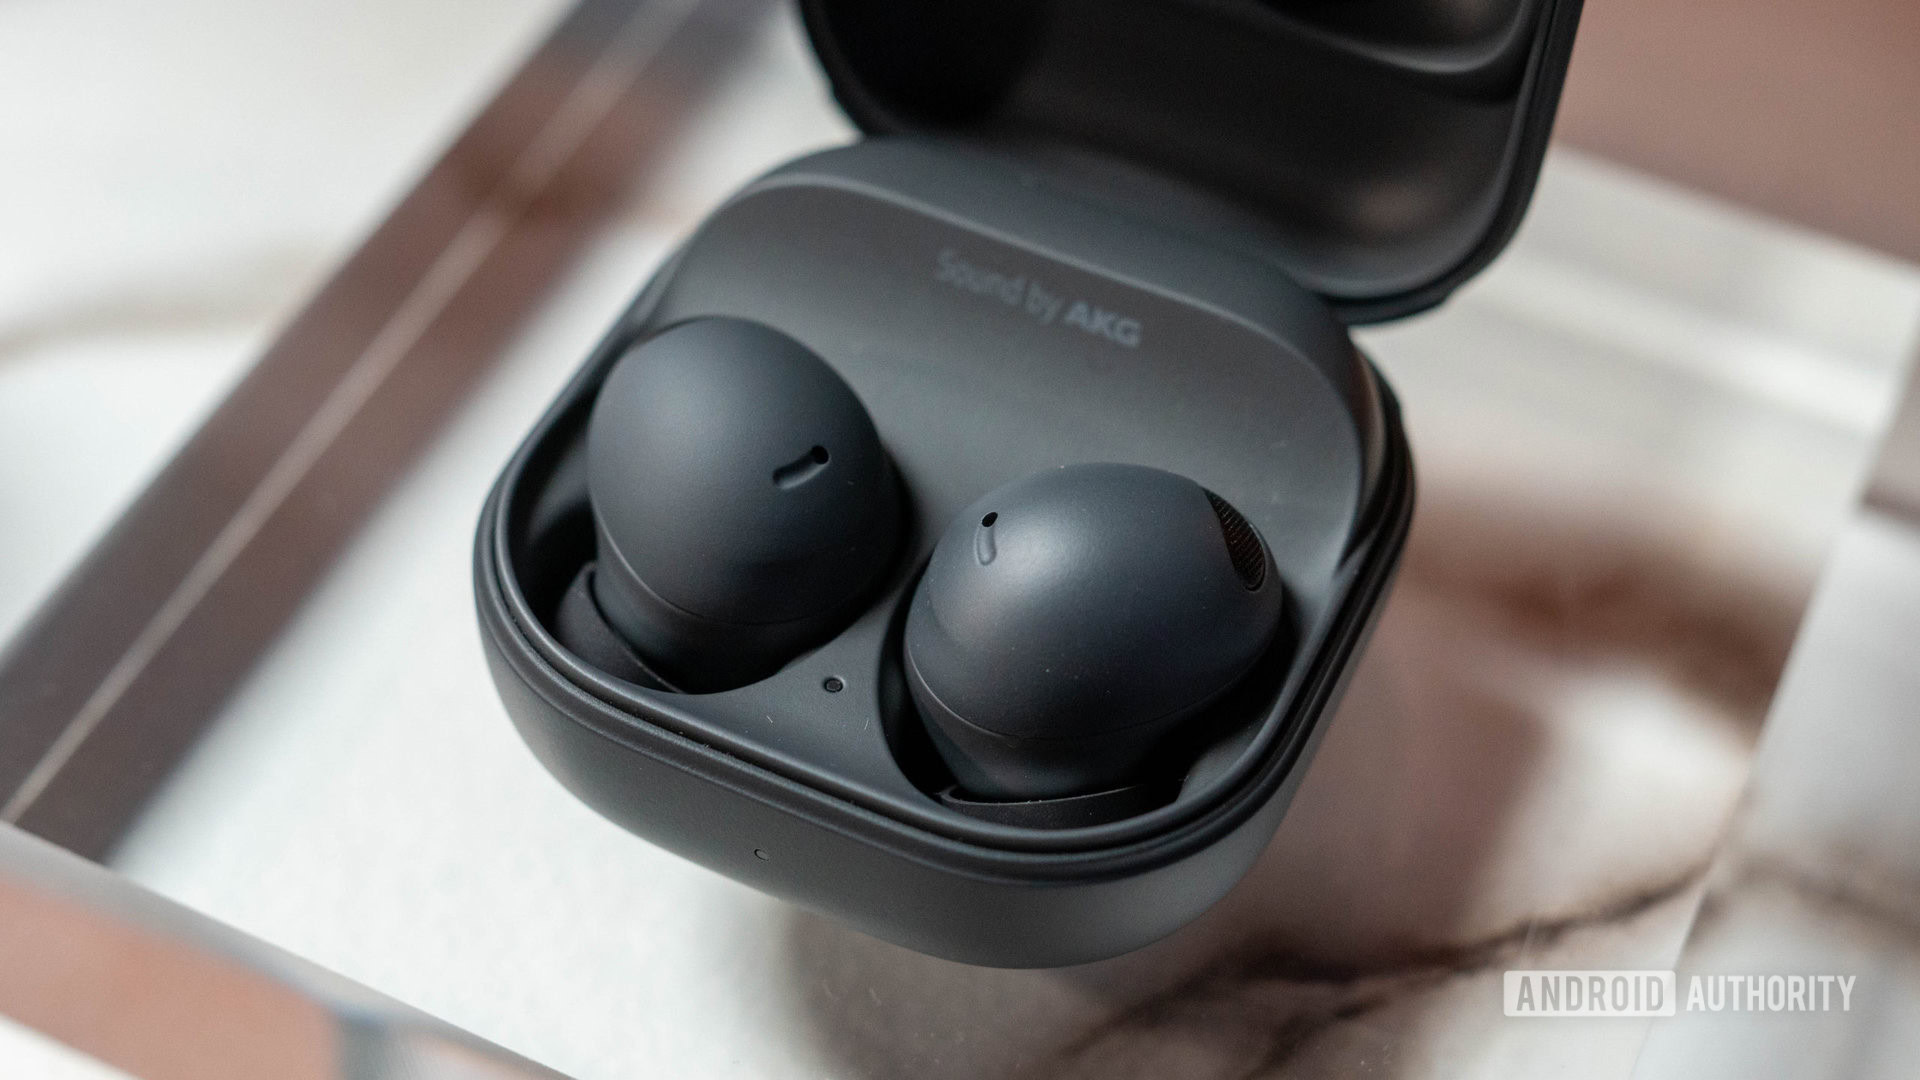 Galaxy Buds Pro Ecouteur - FEX